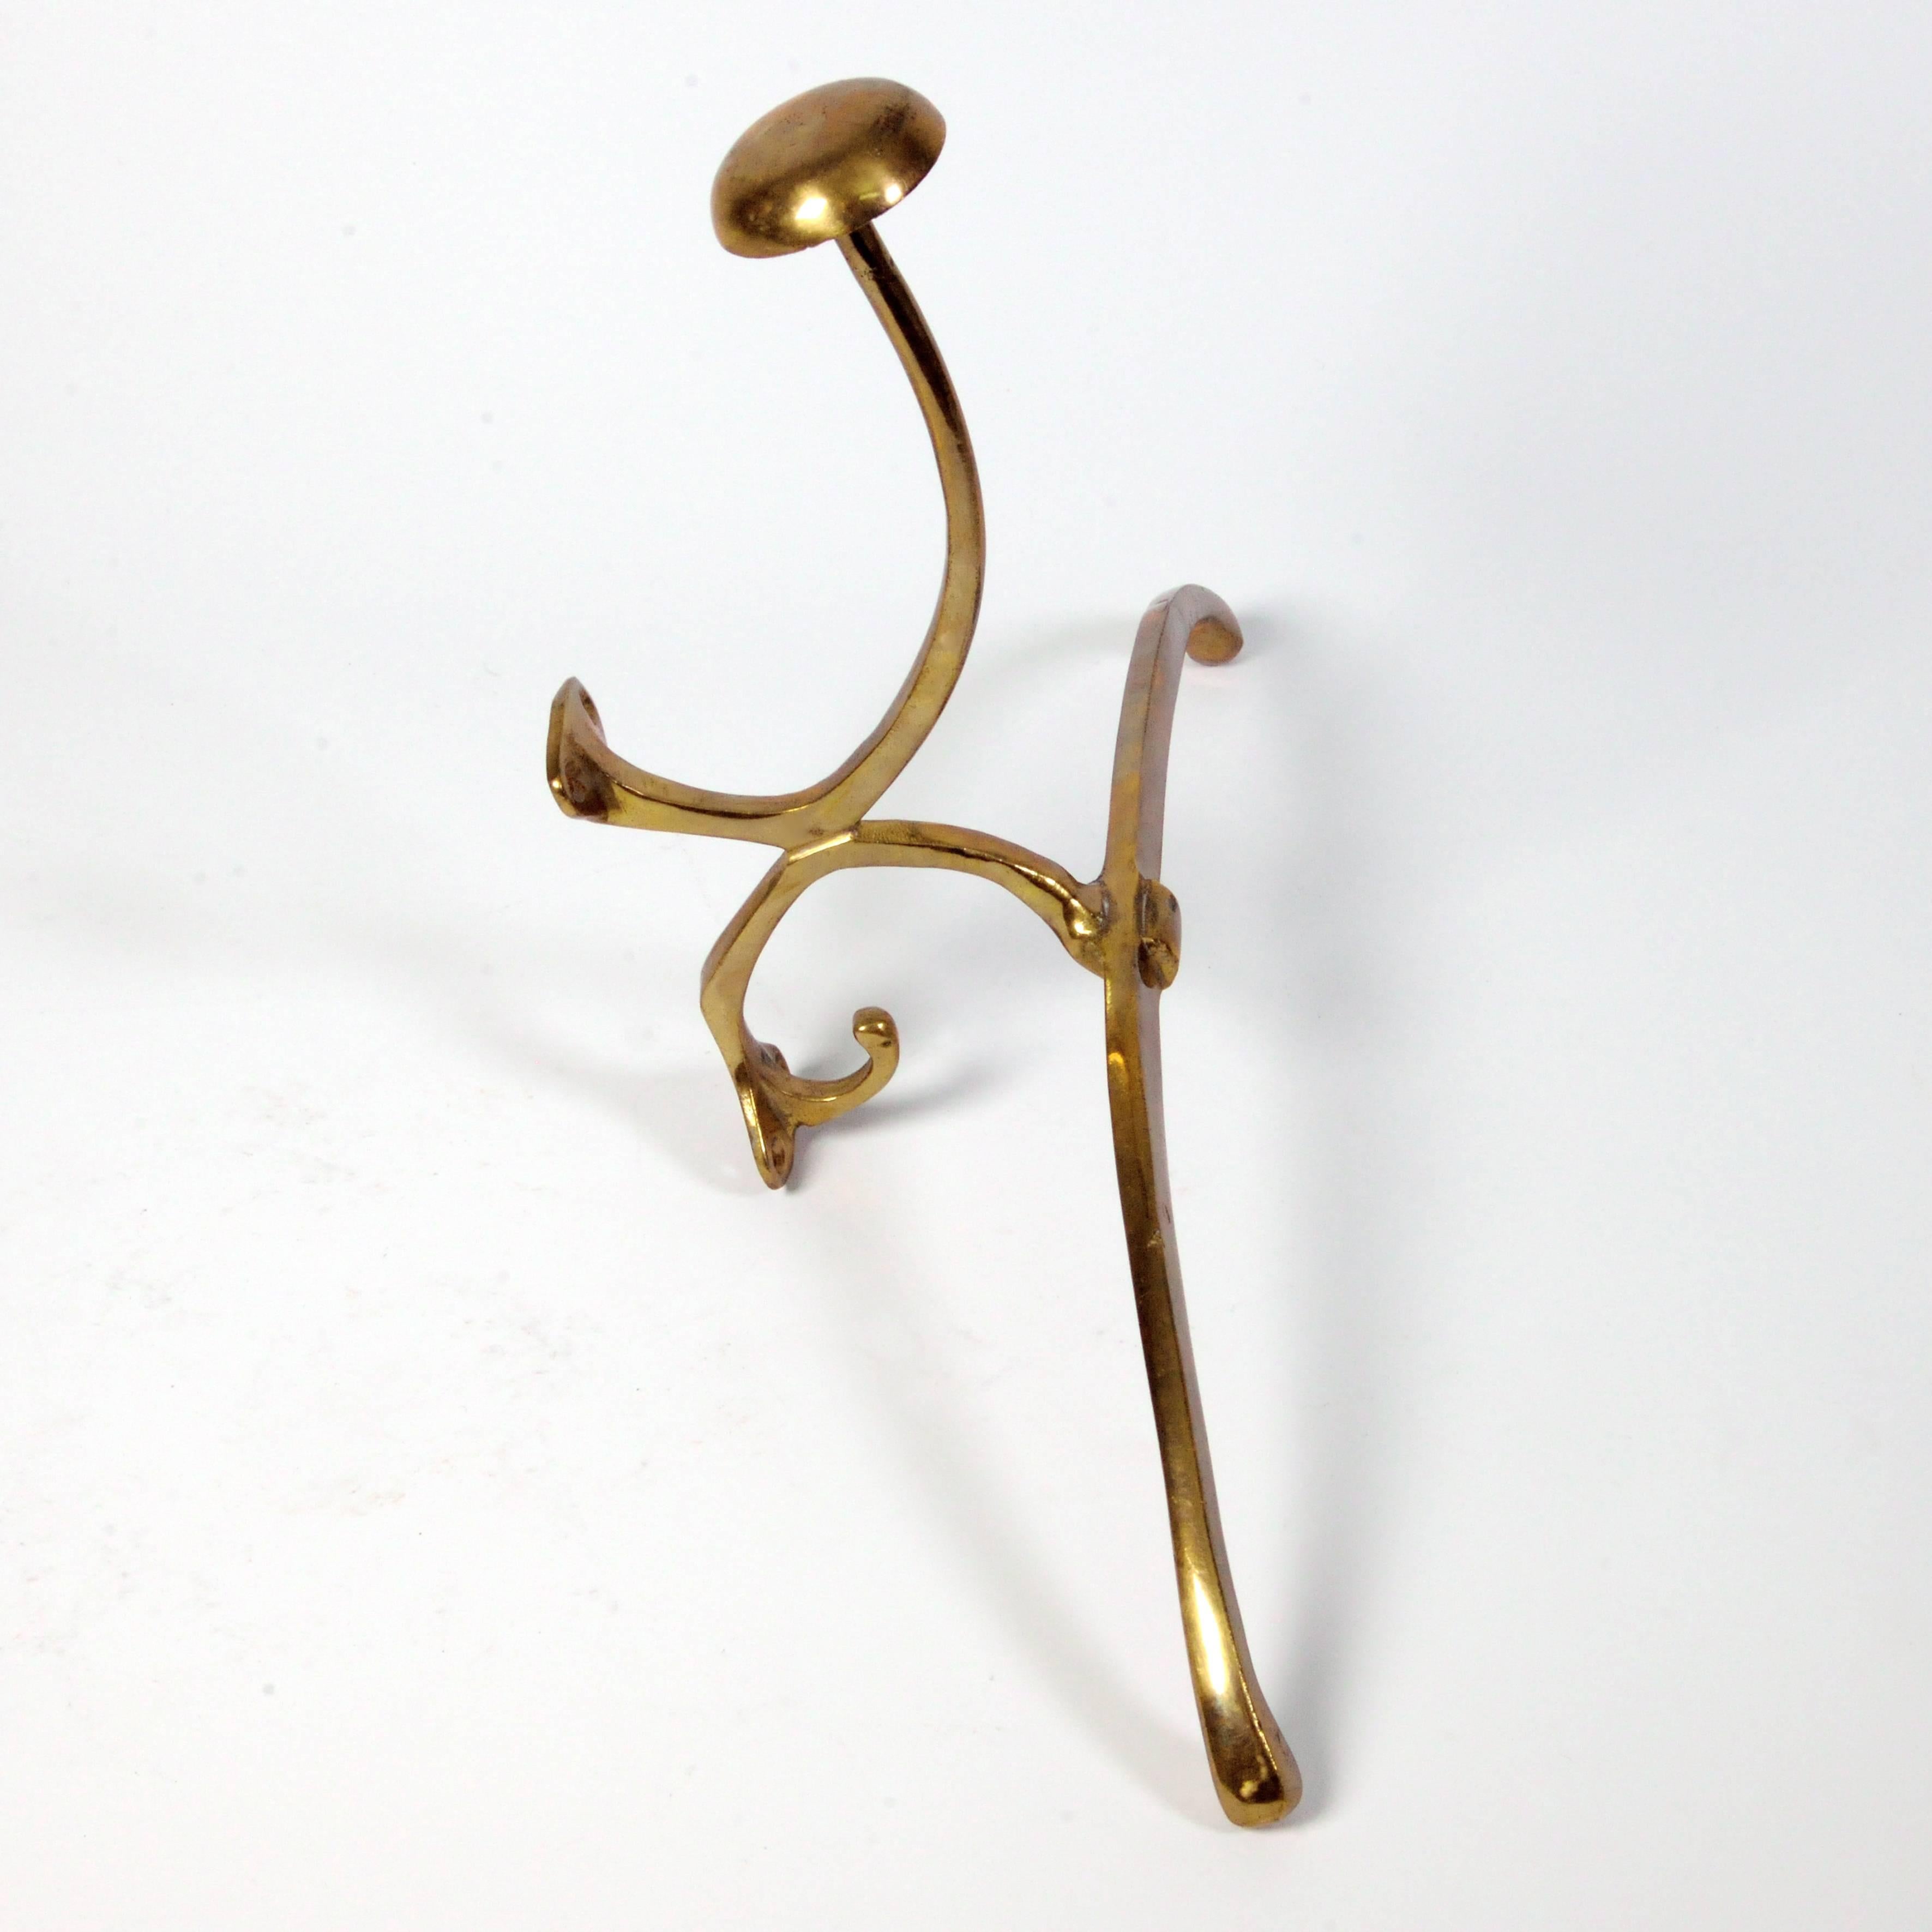 Beautiful coat and hat hanger with a hook for gloves, scarf or bag. This piece coming from marine officer's cabin is magnificent with clothes on or without, stylish and unique. It will find its place in a bedroom, dressing room, entrance hall,